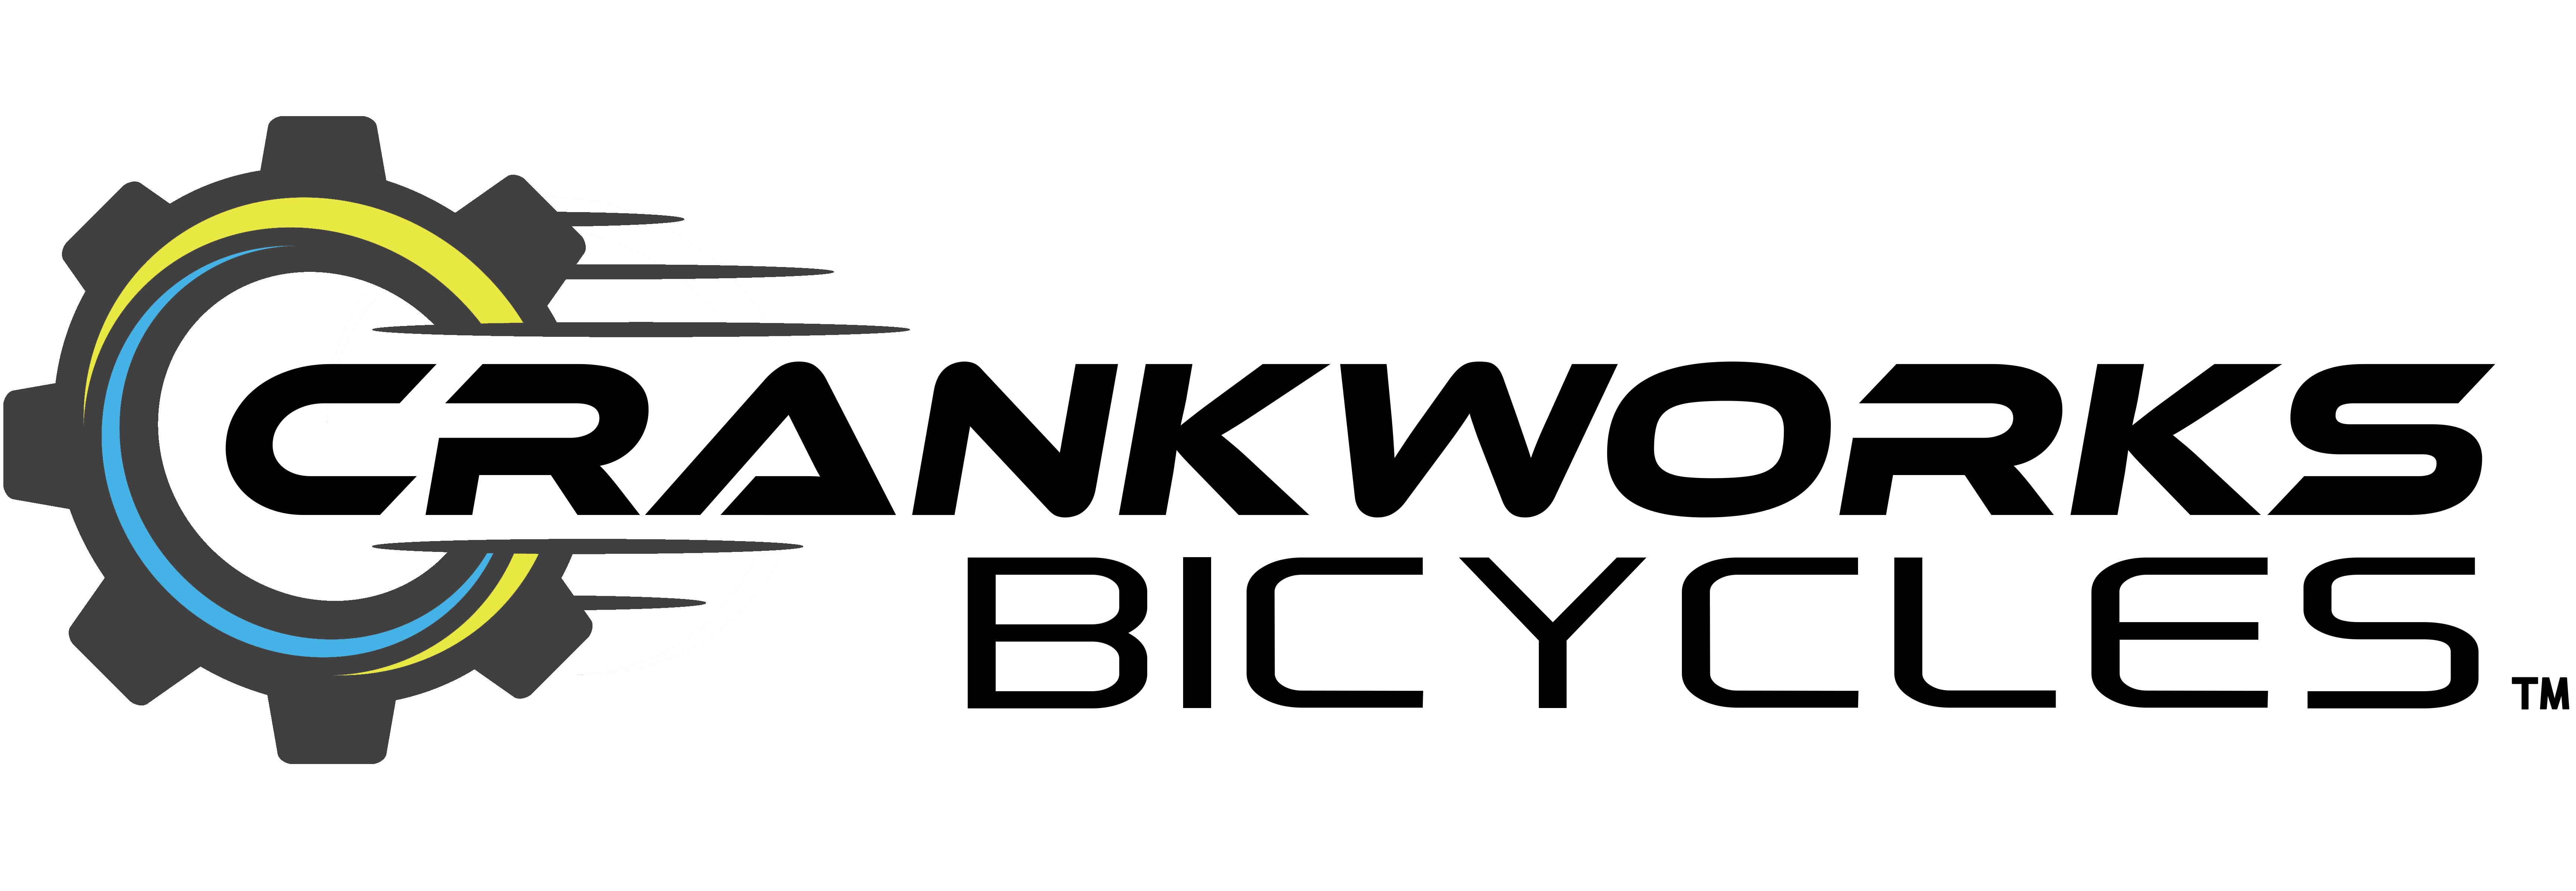 Crankworks Bicycles Supplies Premium e-Bikes for Trails, Road, Hunting and Commuting